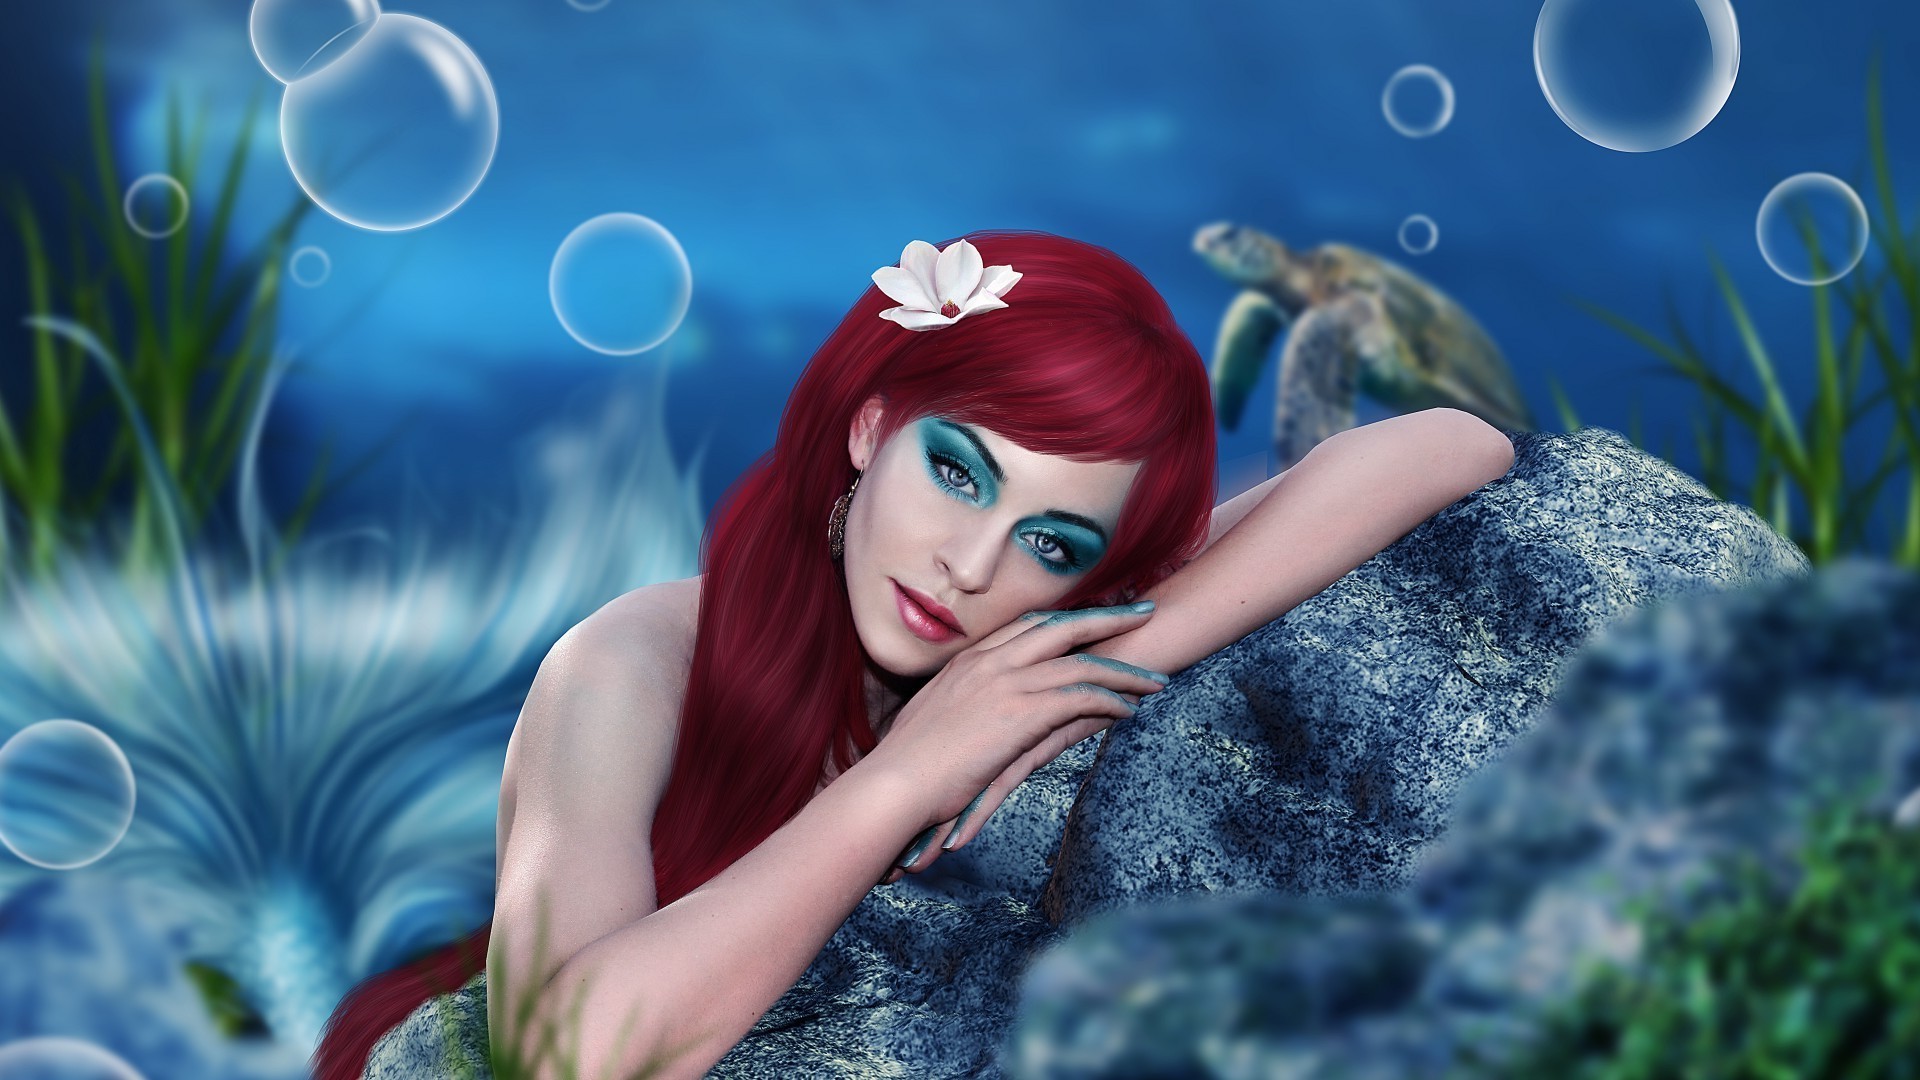 Mermaid WallpaperAmazoncomAppstore for Android